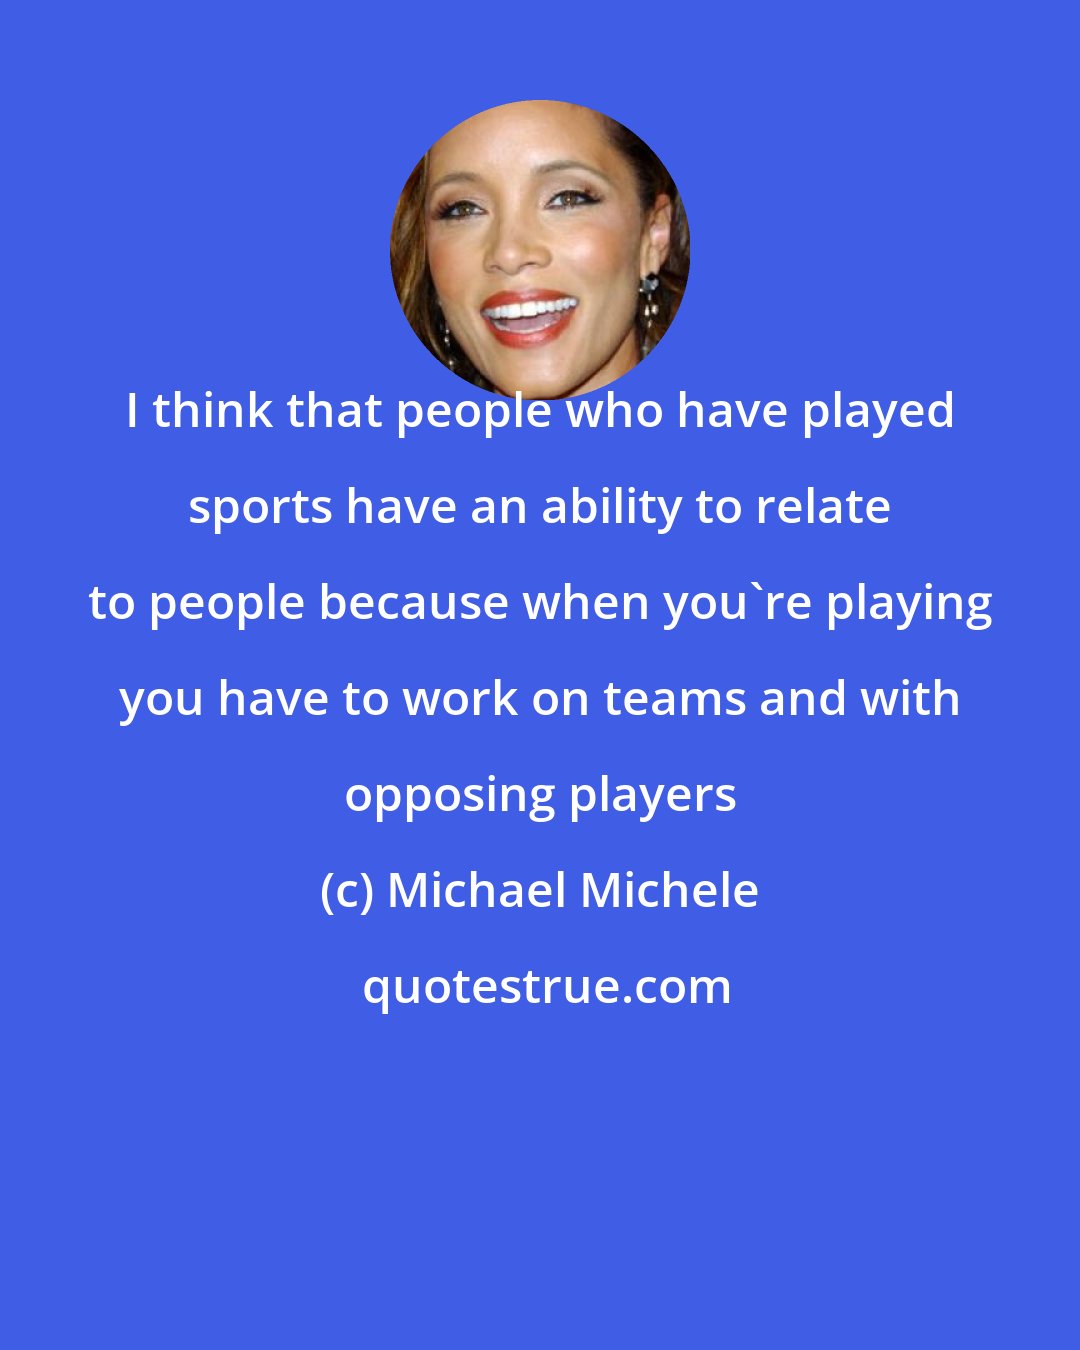 Michael Michele: I think that people who have played sports have an ability to relate to people because when you're playing you have to work on teams and with opposing players